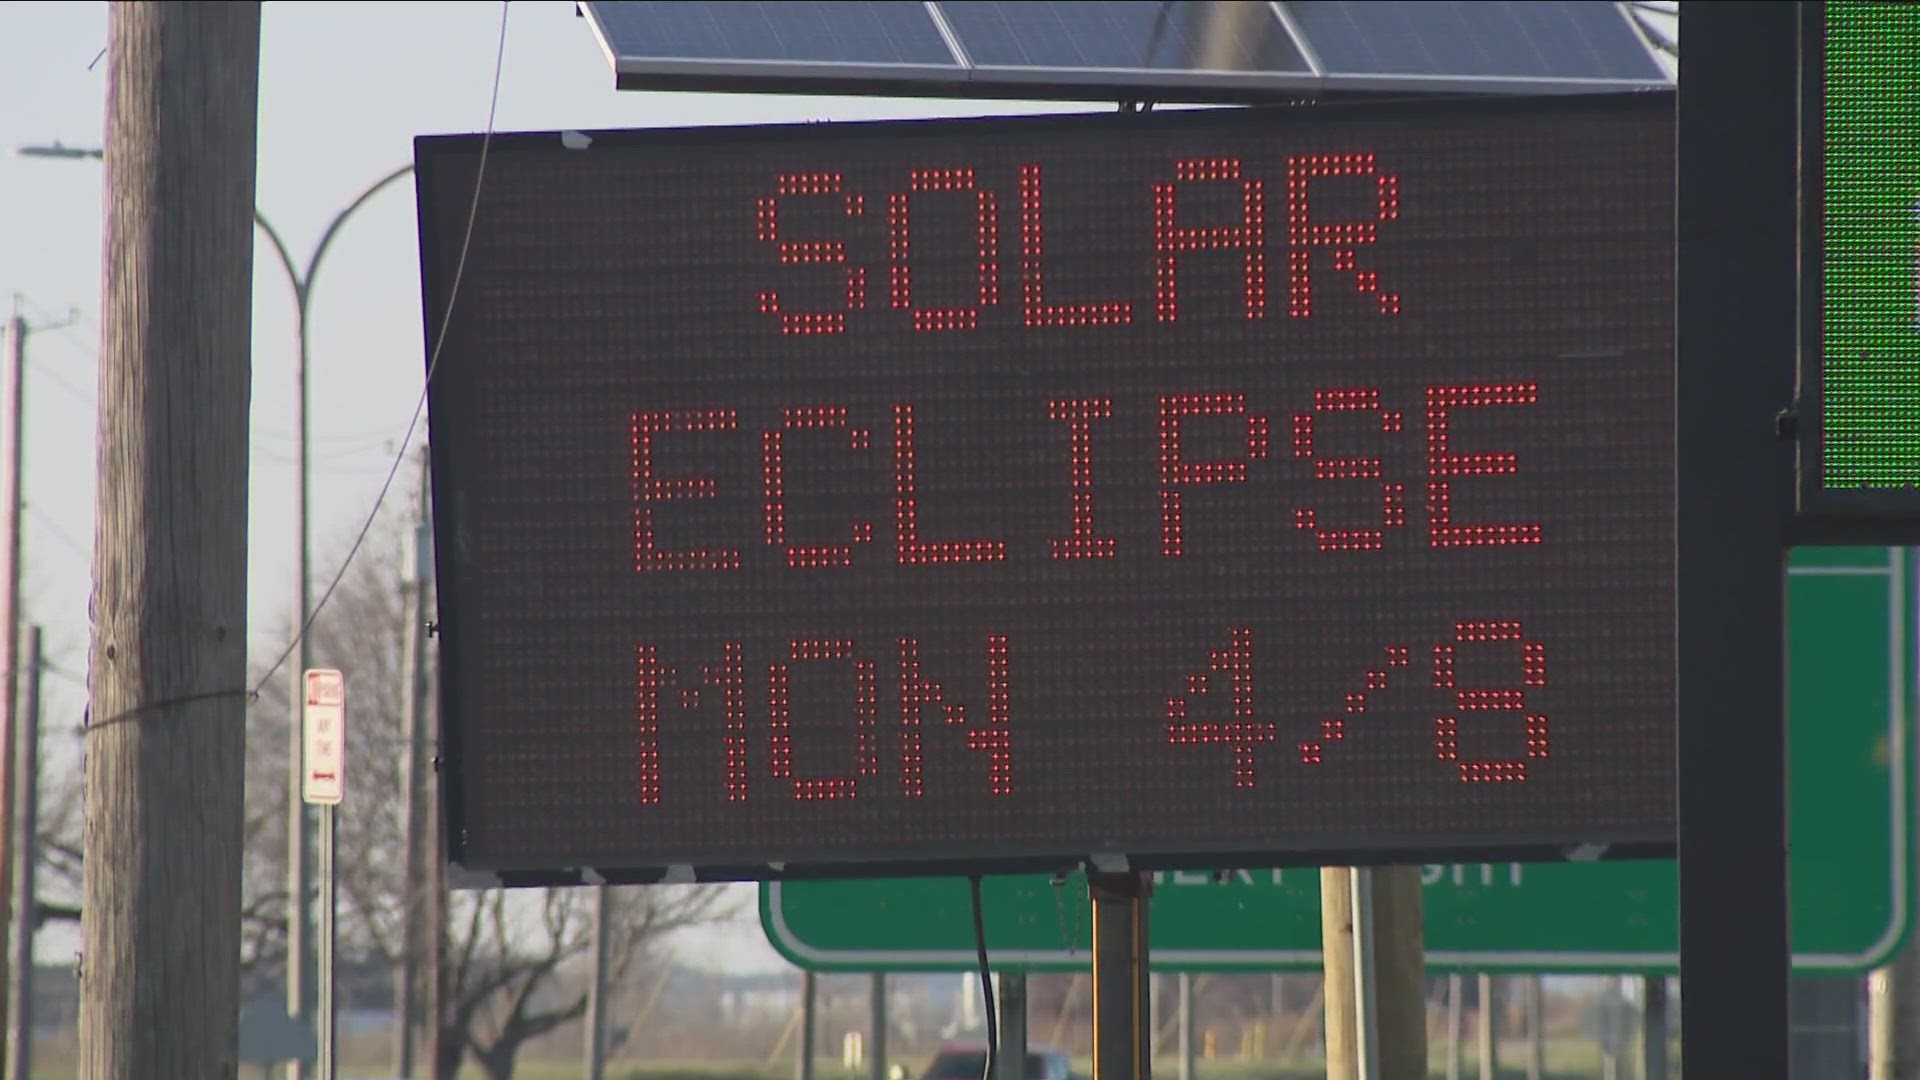 You're going to see more and more signs along the roadways, urging people to arrive early and stay late to events that day, and to expect delays.